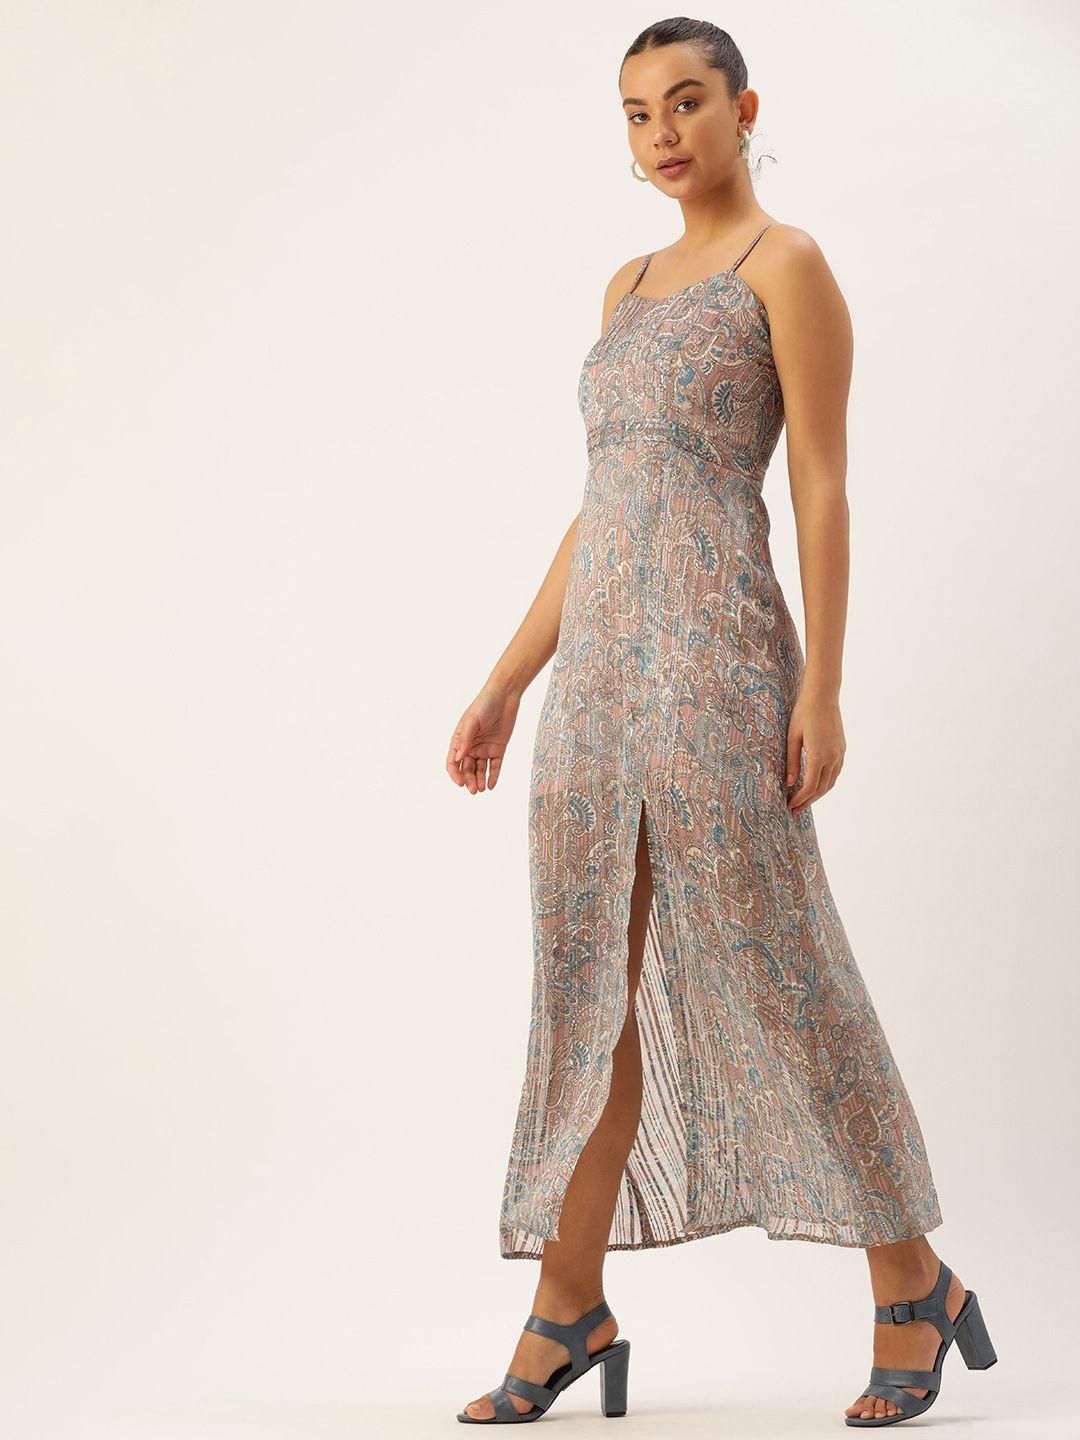 roving-mode-ethnic-motifs-printed-georgette-a-line-maxi-dress-with-side-slit